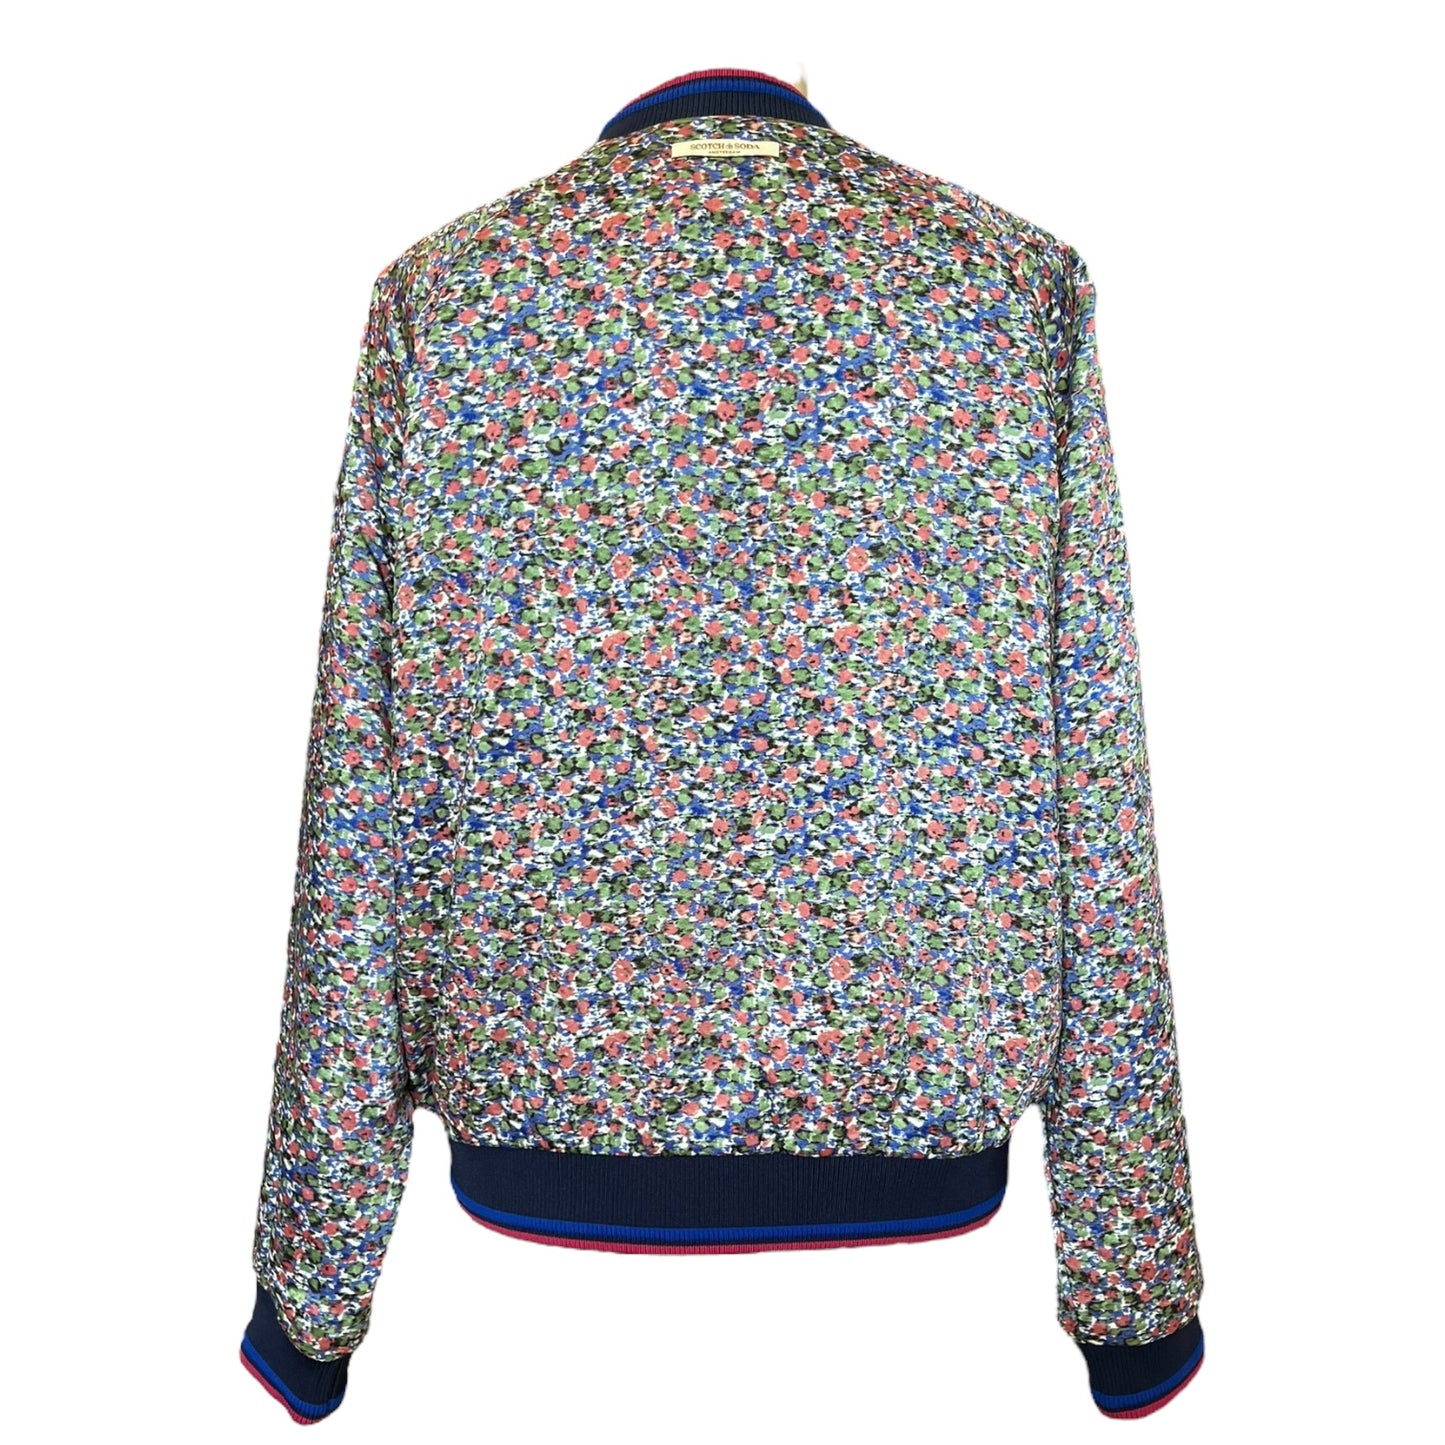 Scotch and Soda Floral Blue Reversible Jacket - 10